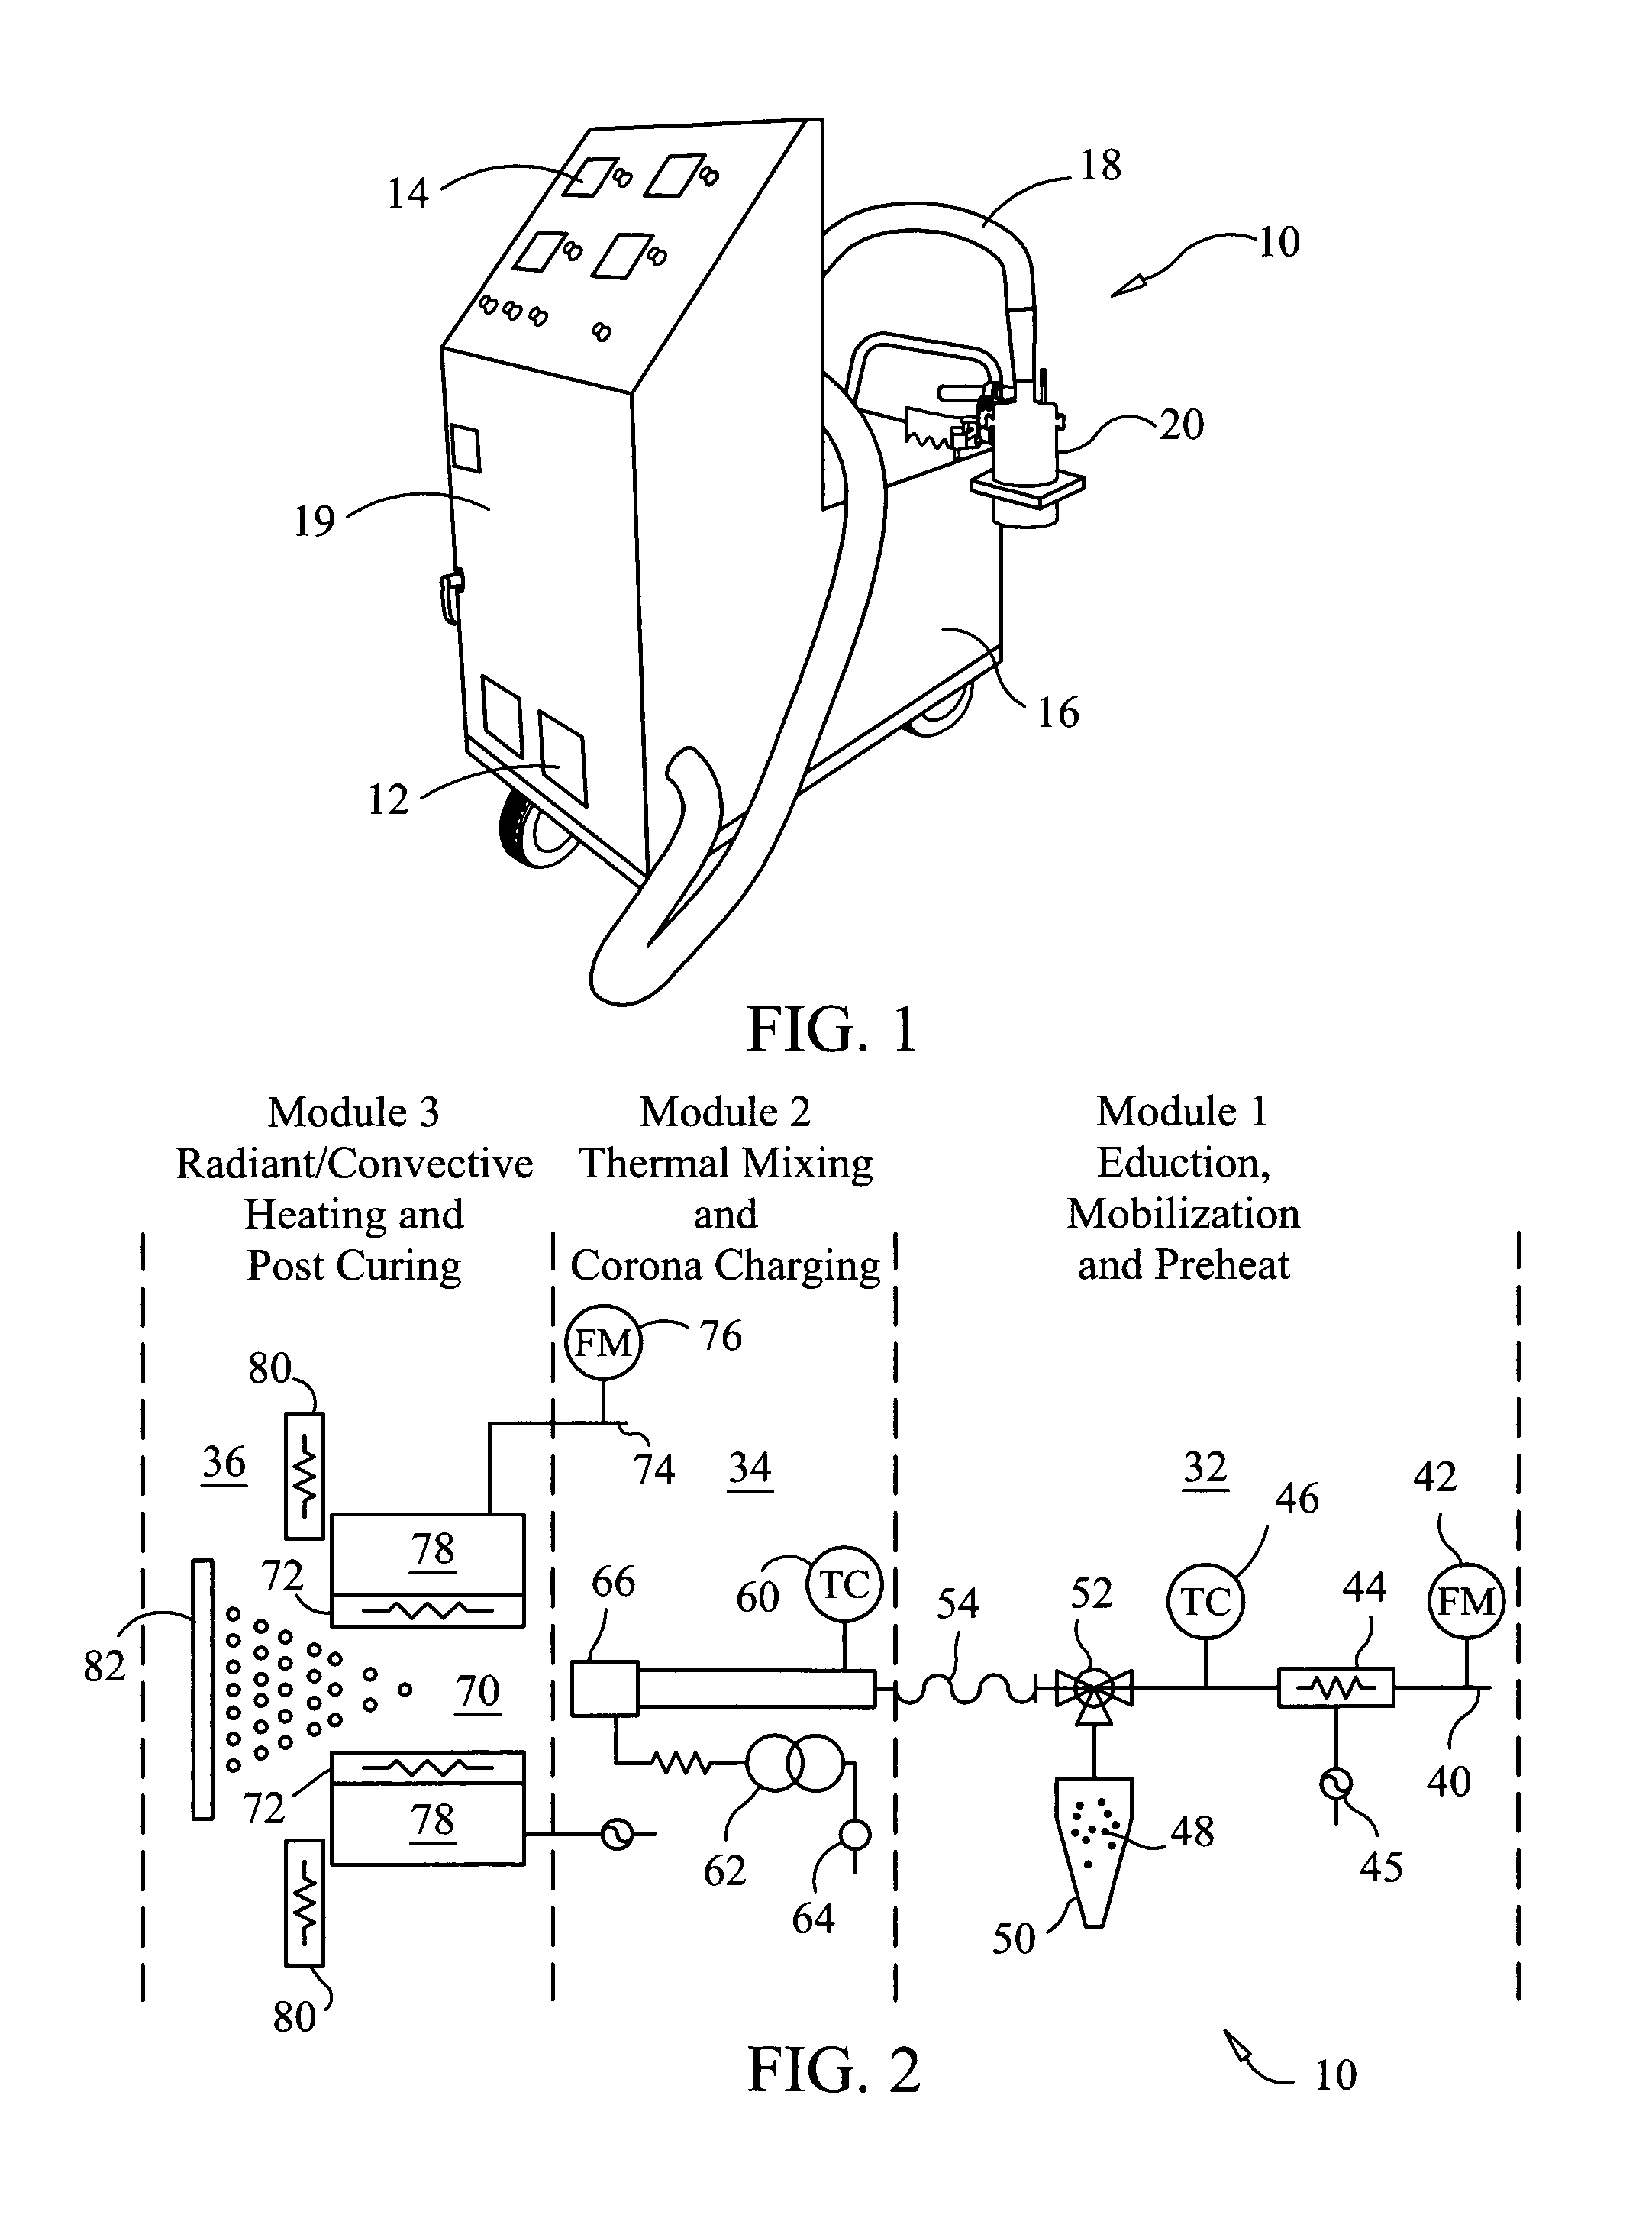 Thermal spray formation of polymer compositions